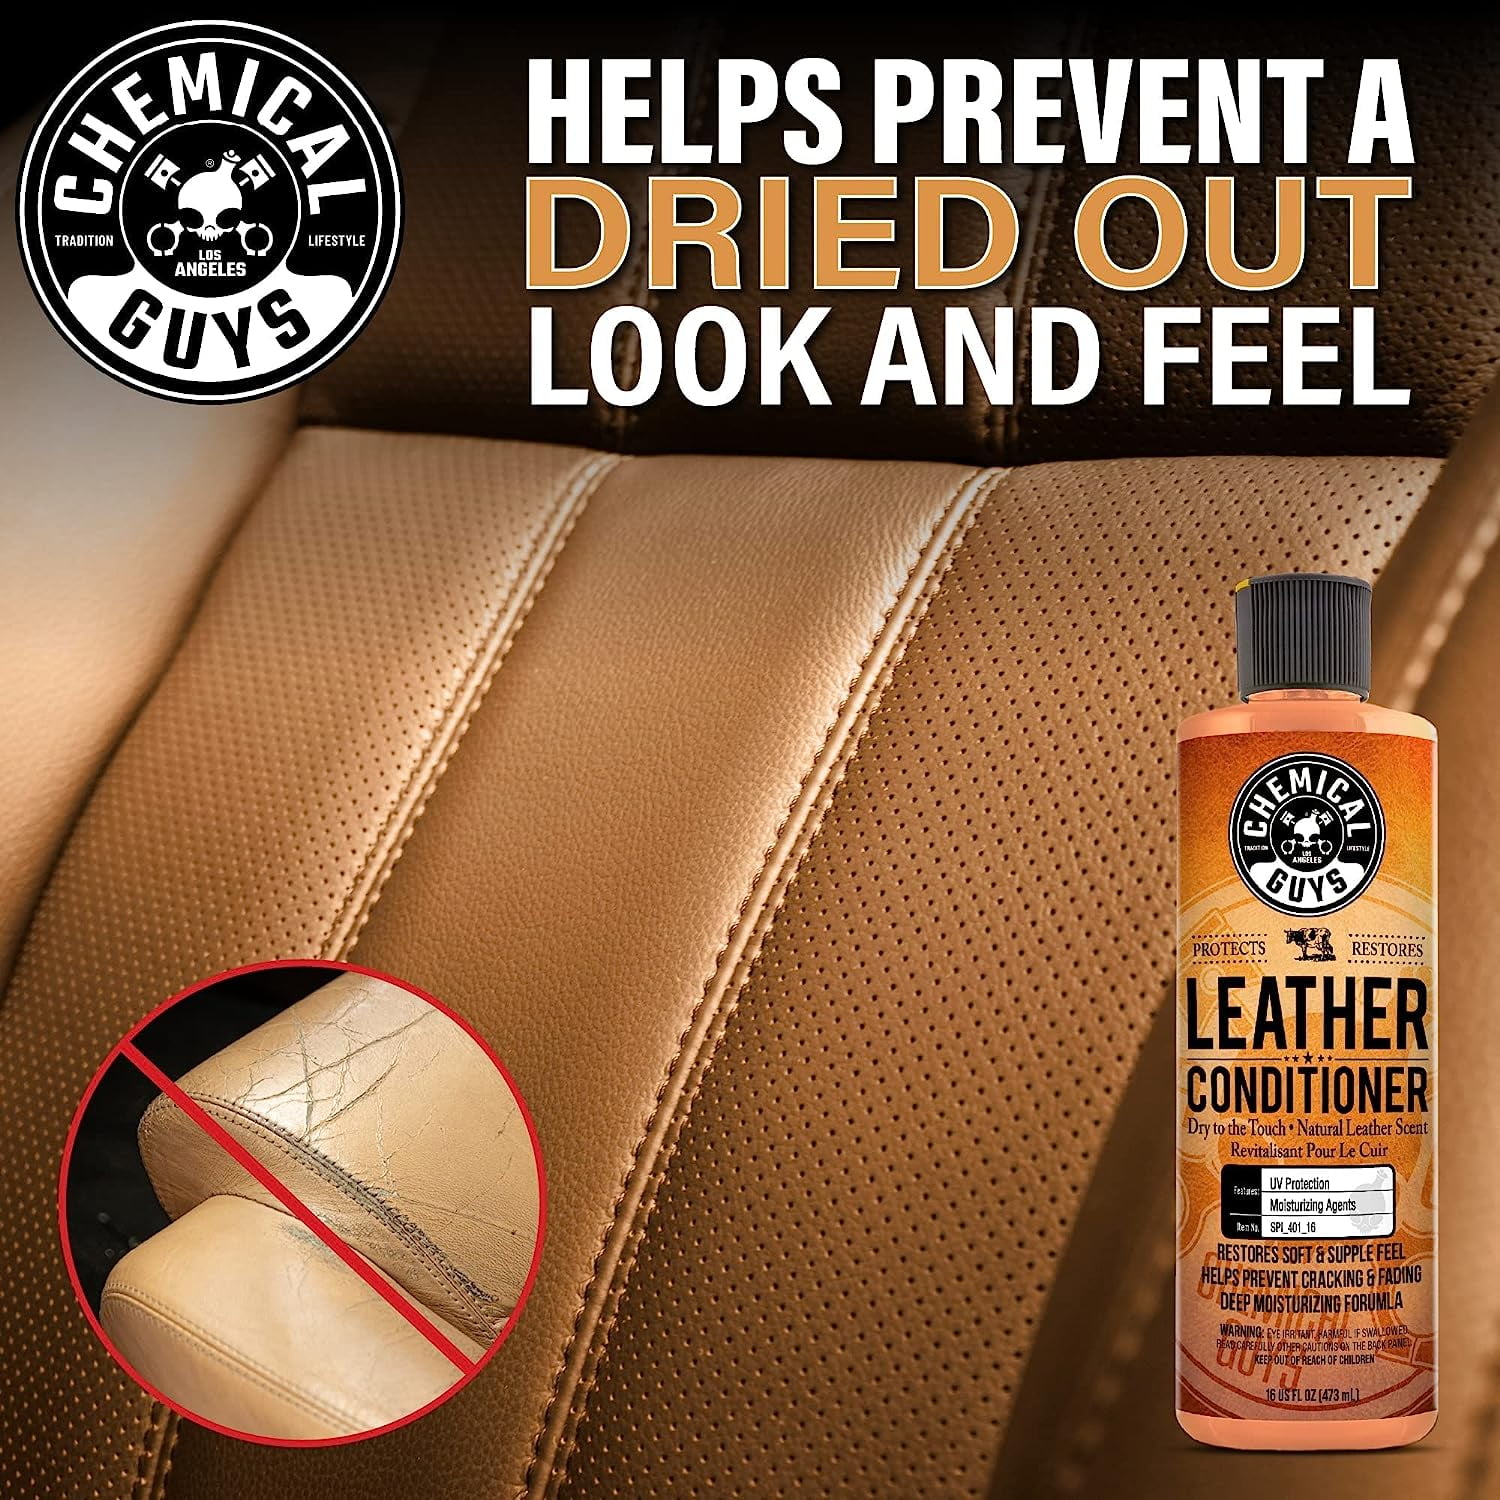 Chemical Guys Leather Cleaner & Leather Serum Kit for Car Interiors, Furniture, Apparel, Shoes, Boots, and More (Works on Natural, Synthetic